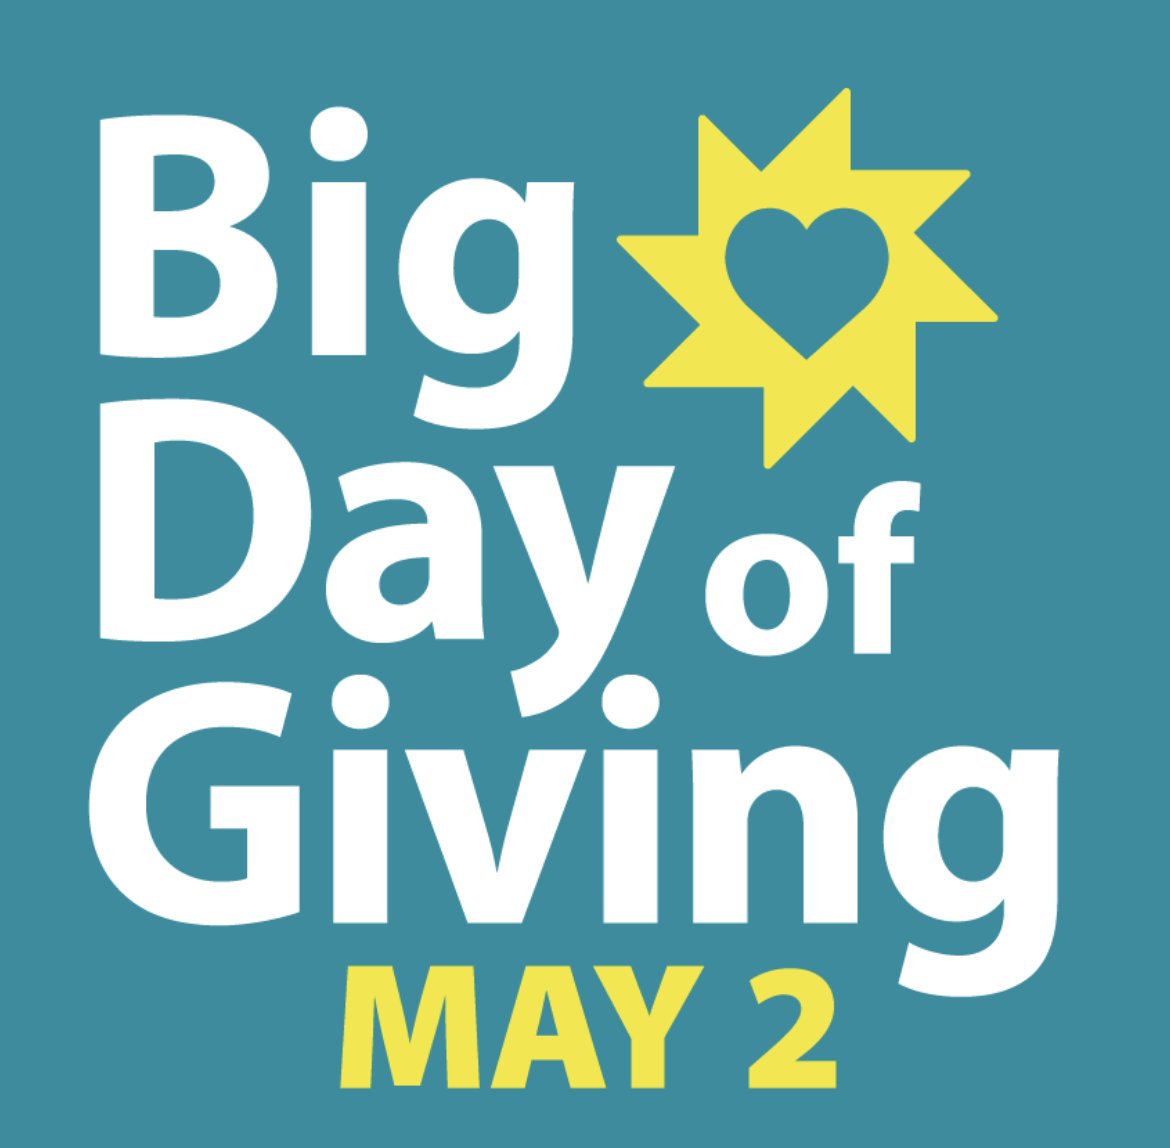 Hey YOLO county 👋
The Sacramento region's Big Day of Giving is less than two months away!

Will you support YOLO County CASA on that day?

Please comment YES below ⬇ if you plan to support us, and why. And THANK YOU!  #BigDayOfGiving  #weappreciateyou